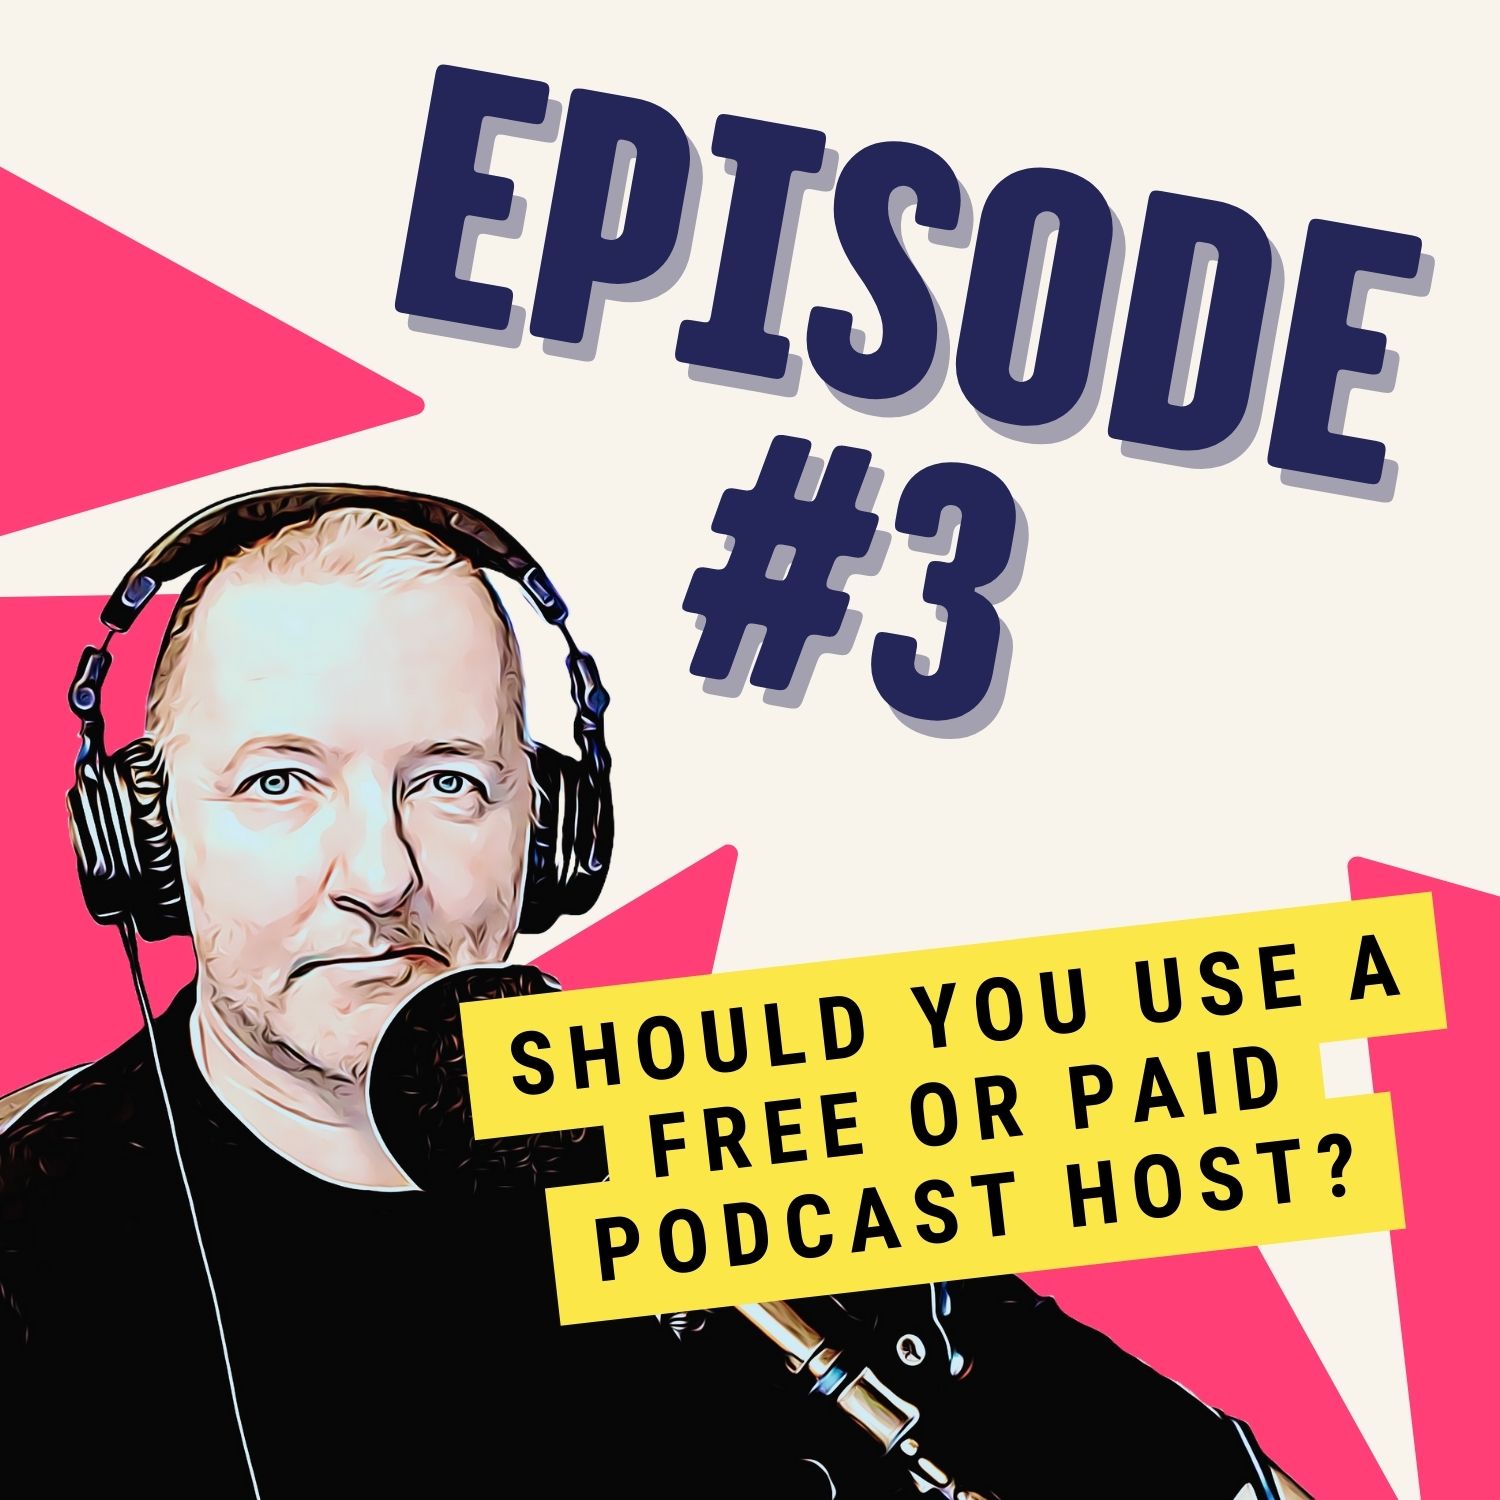 Should You Use a Free or Paid Podcast Host?